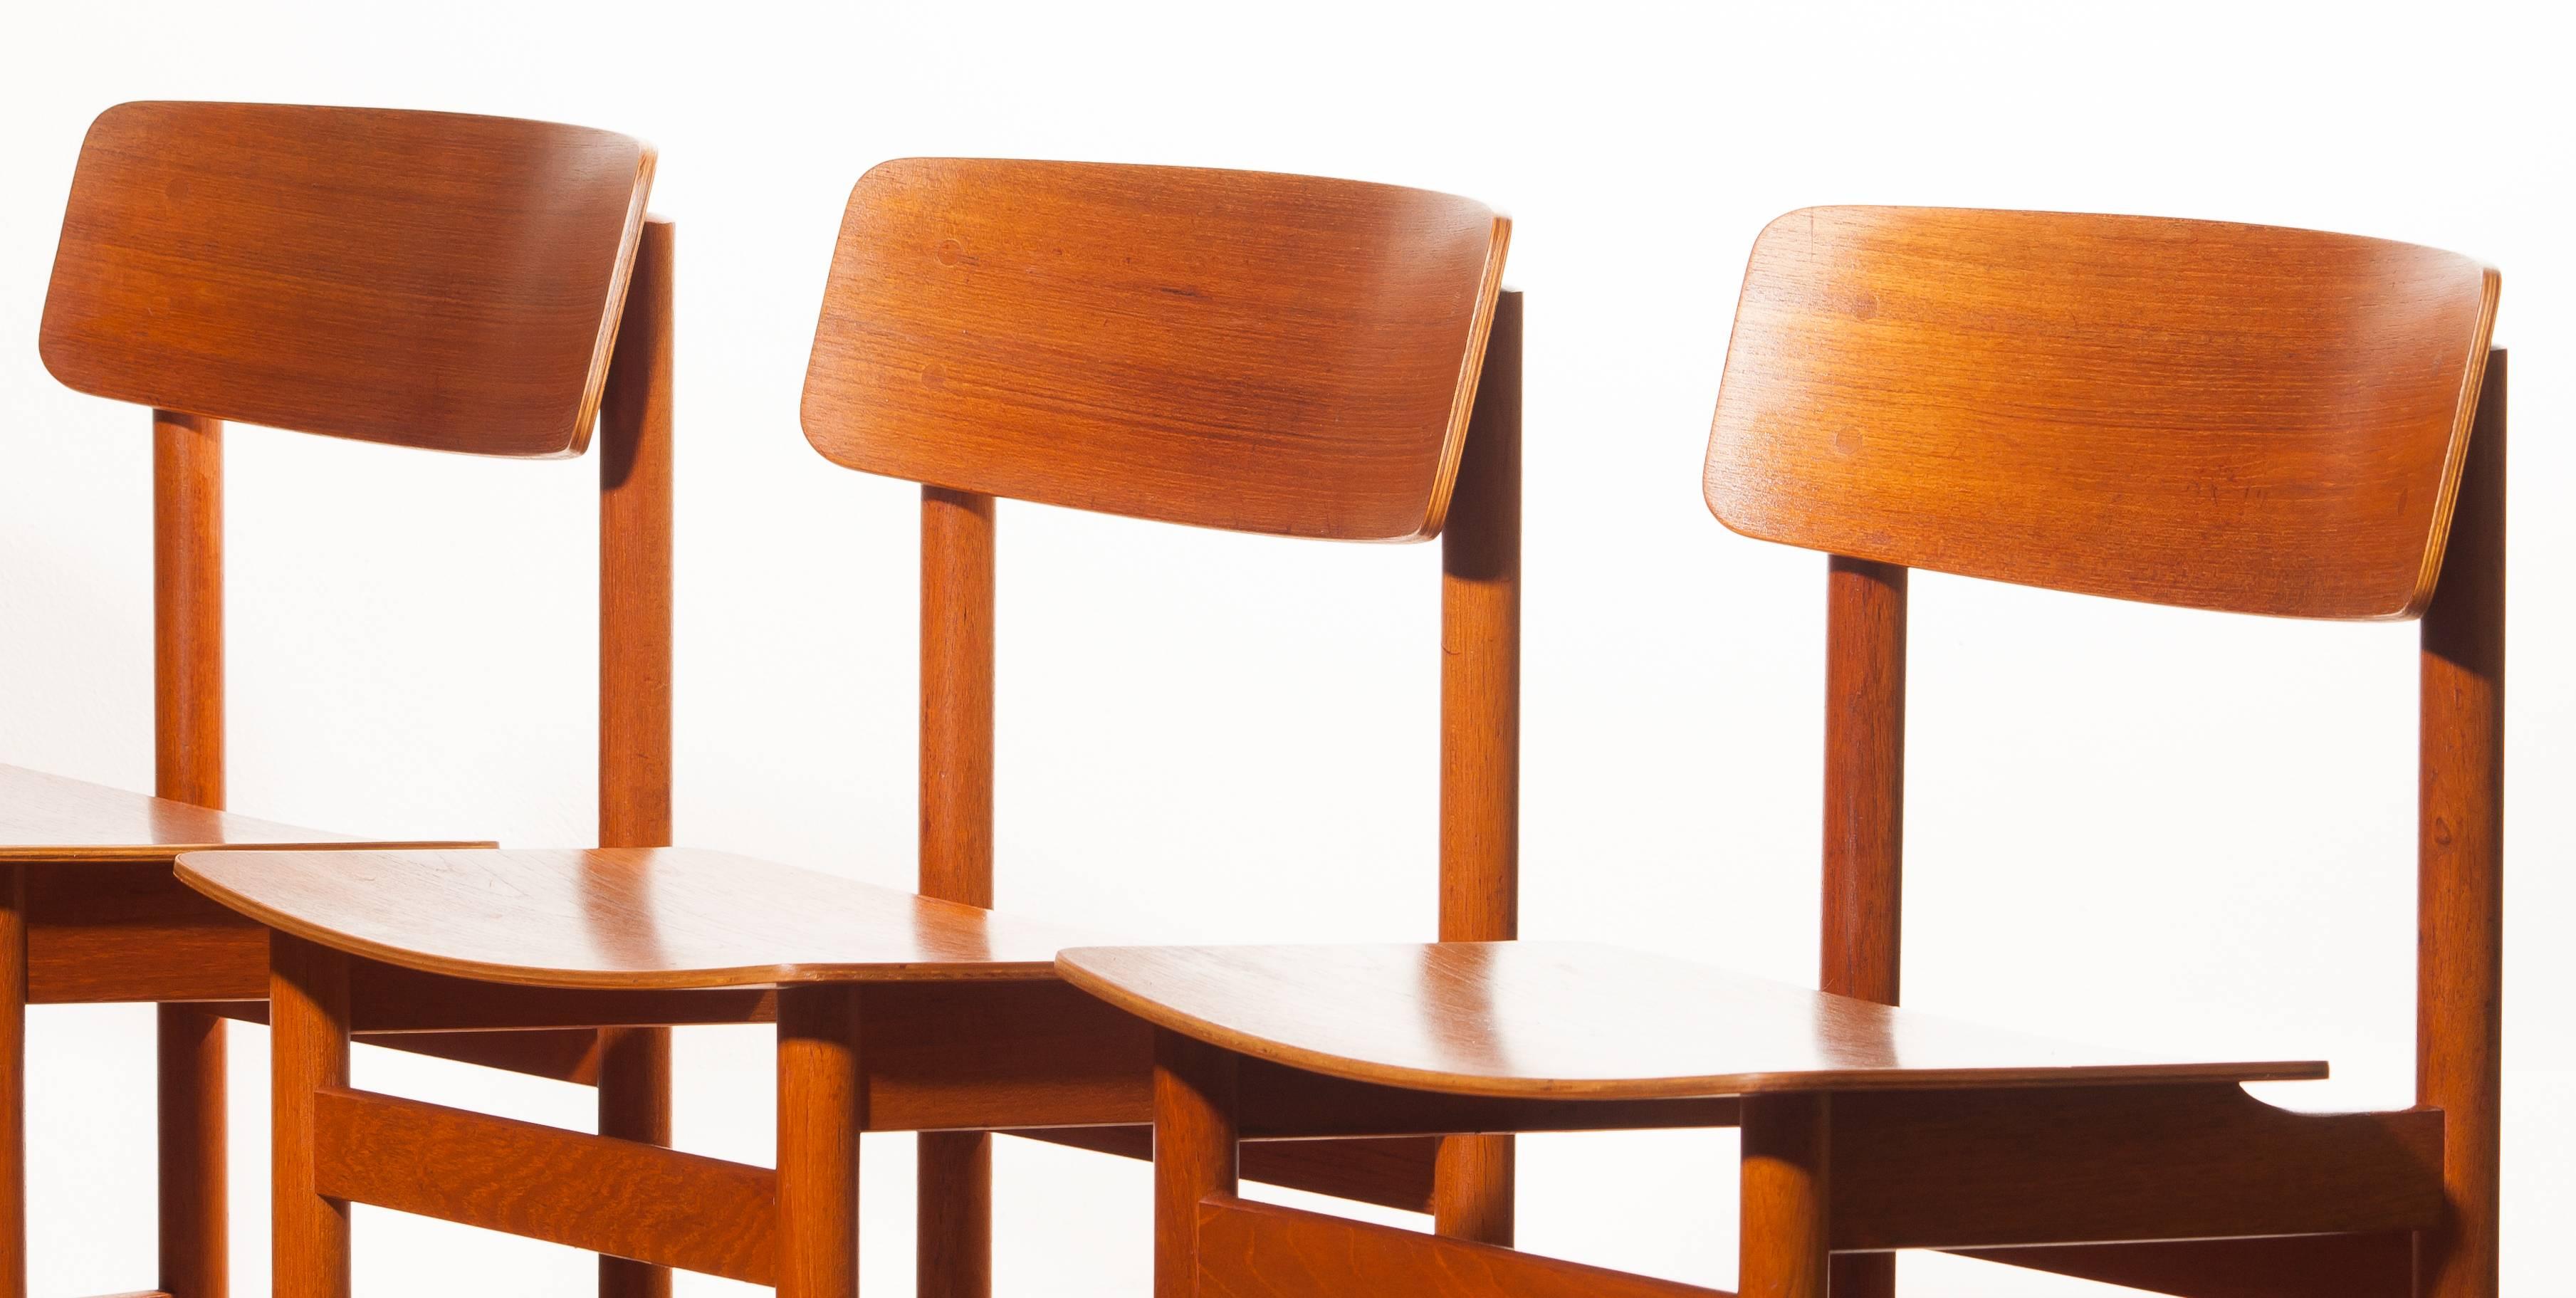 1960s, a Set of Four Teak Plywood Dining Chairs by Børge Mogensen Attributes 2